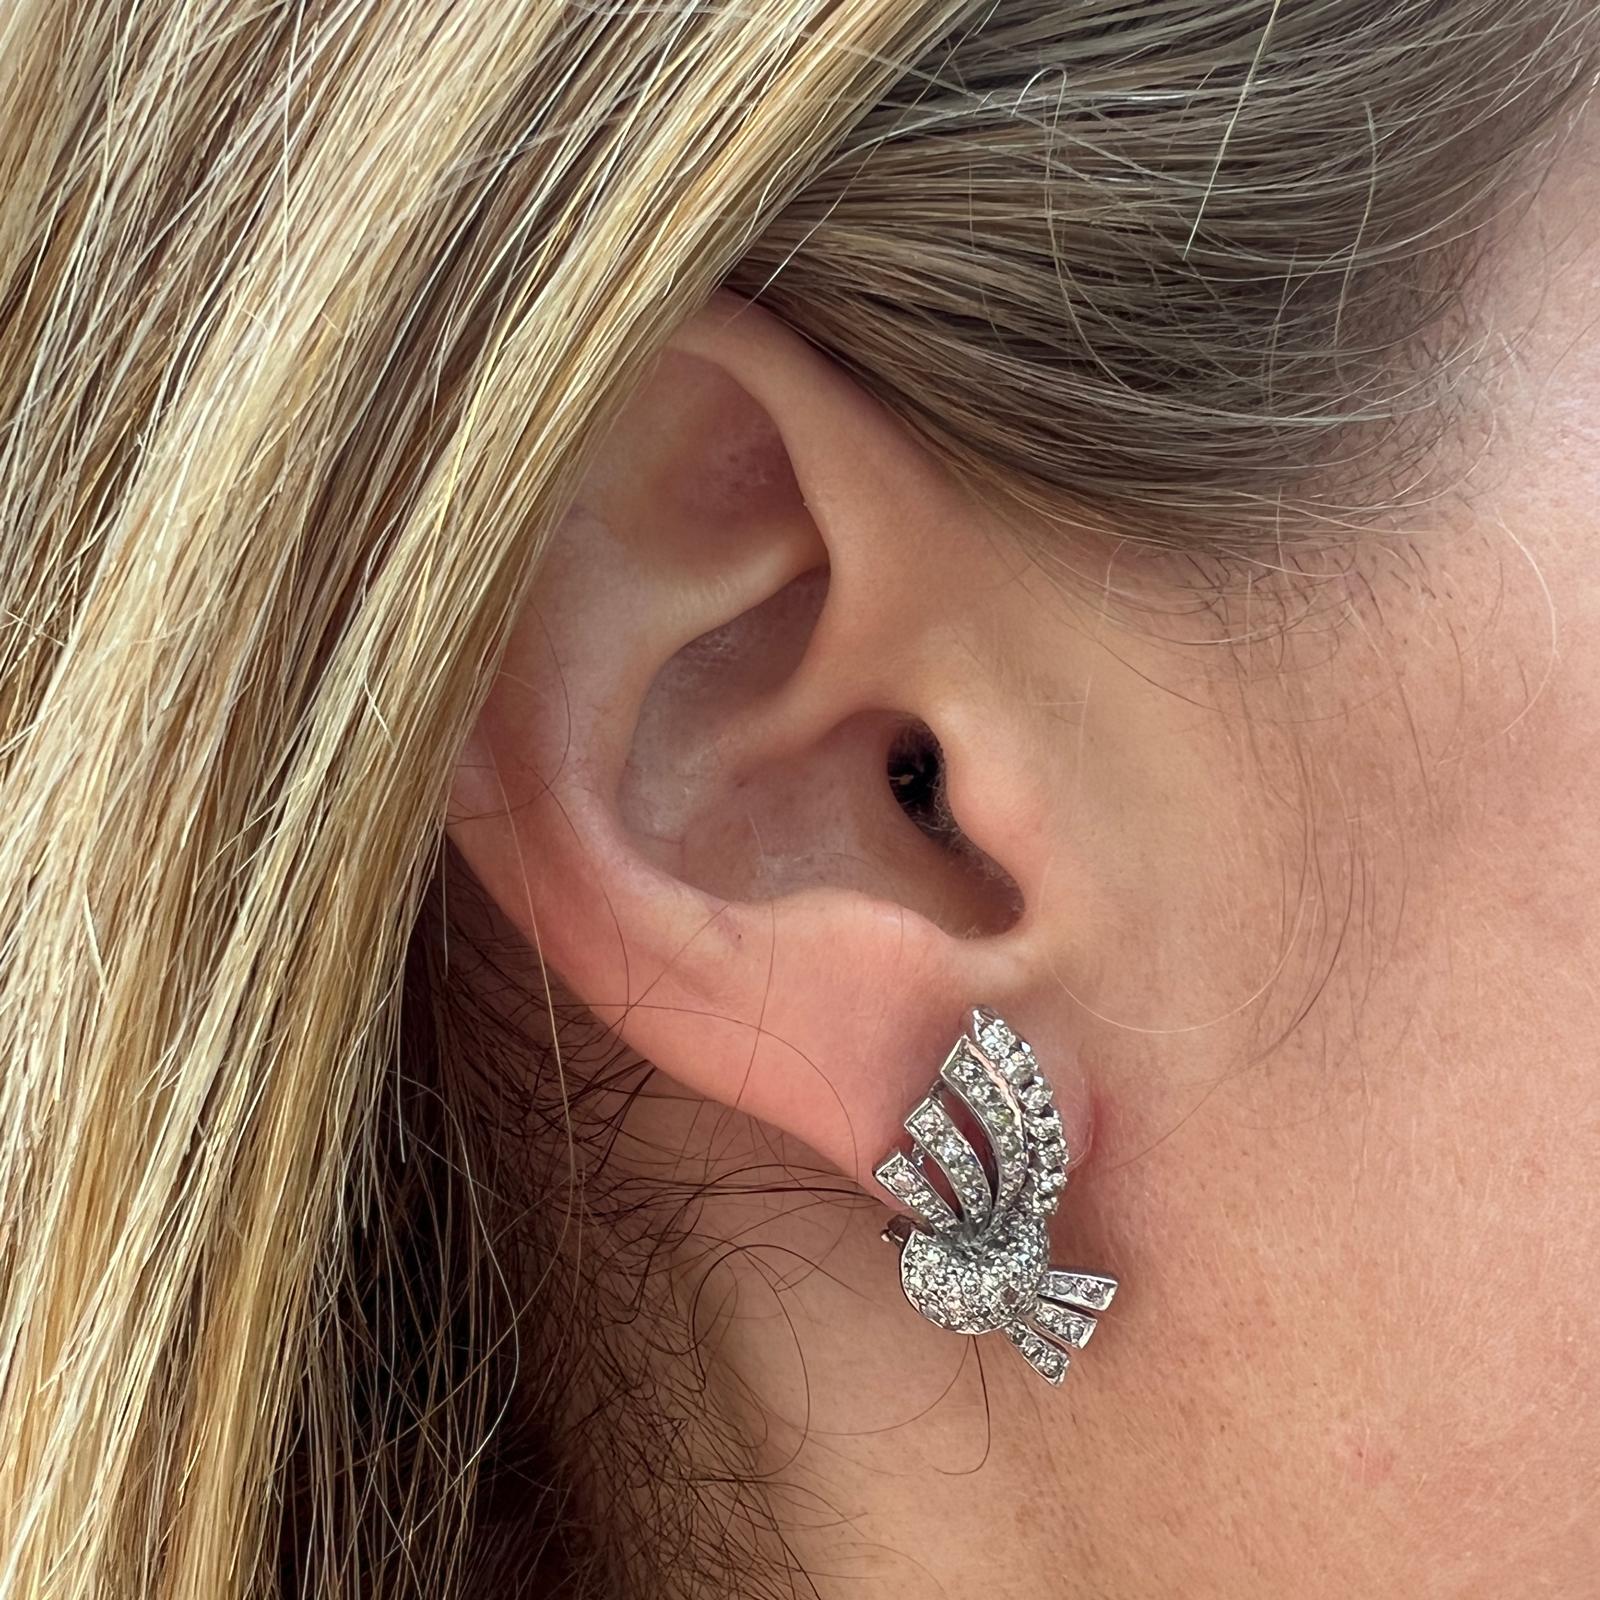 Beautiful and feminine original Retro diamond ribbon earrings handcrafted in platinum. The earrings feature 90 single cut diamonds weighing approximately 1.50 carat total weight and graded H-I color and SI clarity. The earrings measure 10 x 30mm